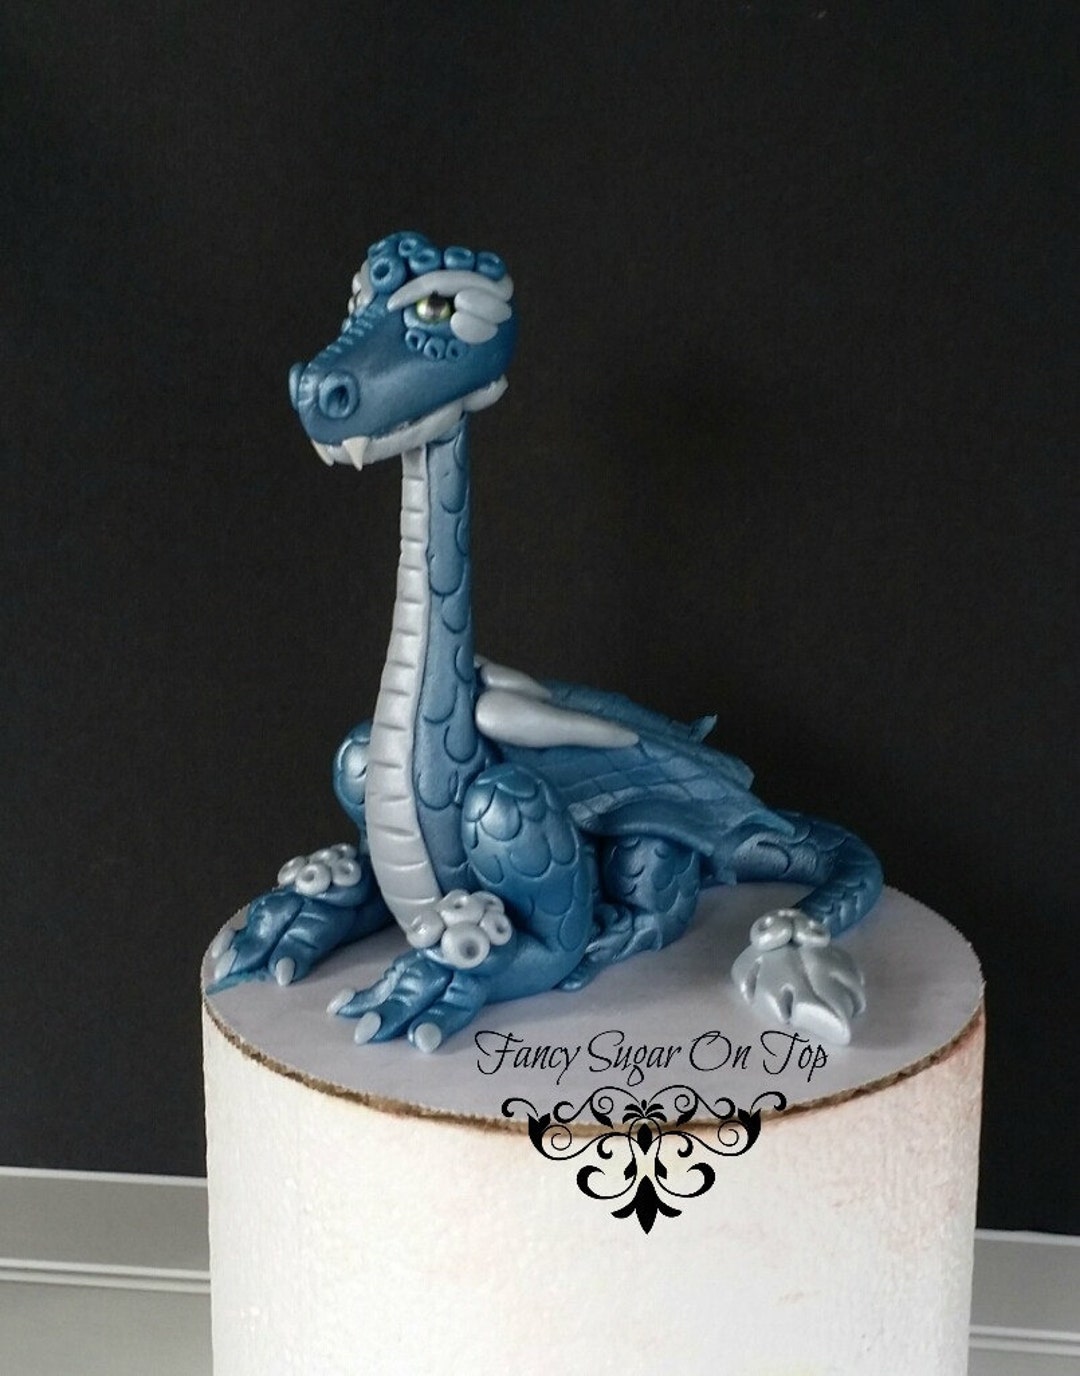 Has anyone any idea how this was done? I doubt it would be painted on  gumpaste or fondant since that would take forever? Is it printed on edible  paper and then stuck